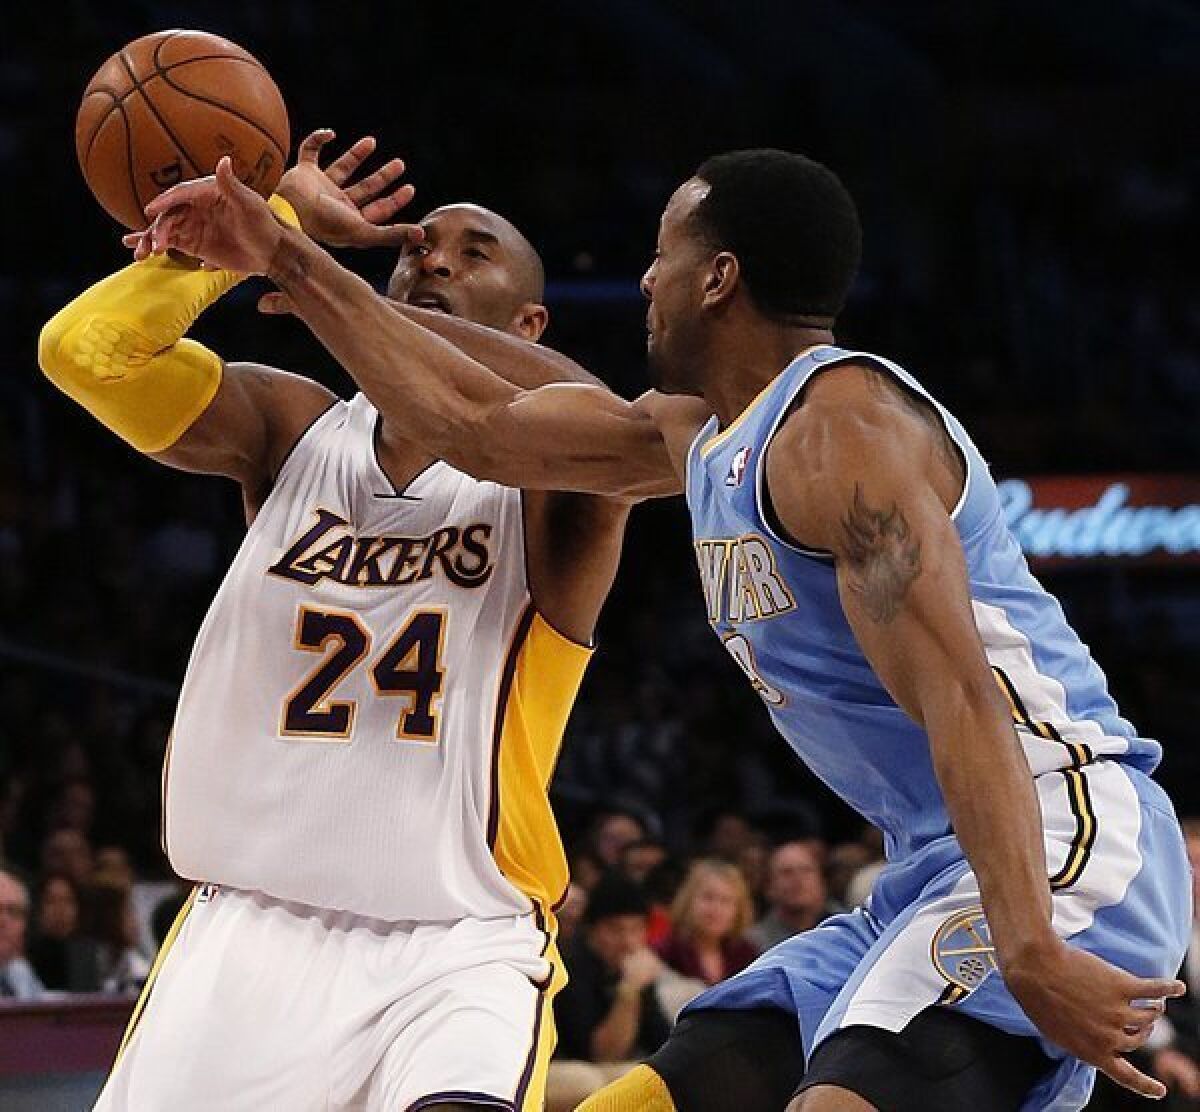 Nuggets' Andre Iguodala knocks the ball away from Lakers guard Kobe Bryant in the first half of a game last month.